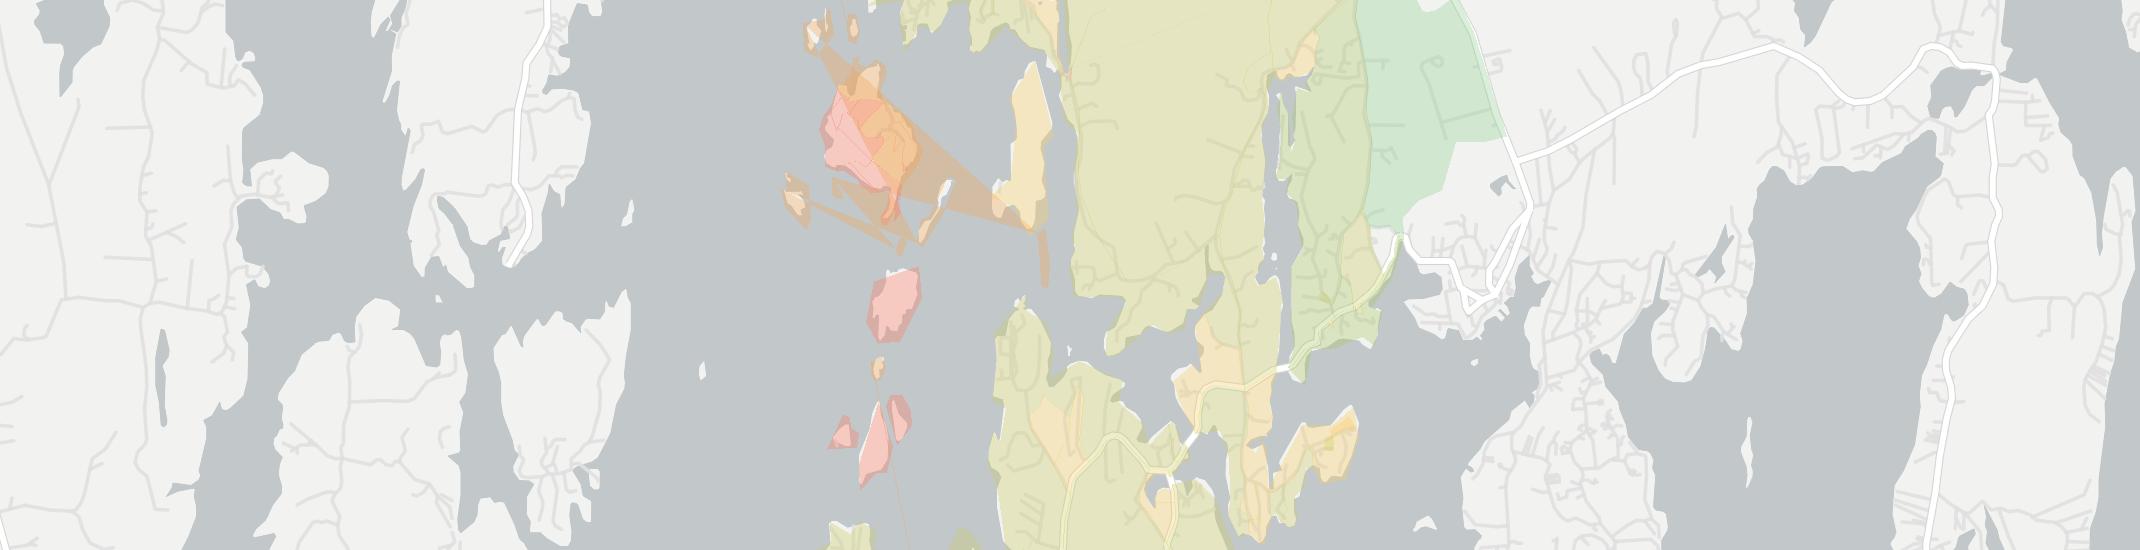 West Boothbay Harbor Internet Competition Map. Click for interactive map.